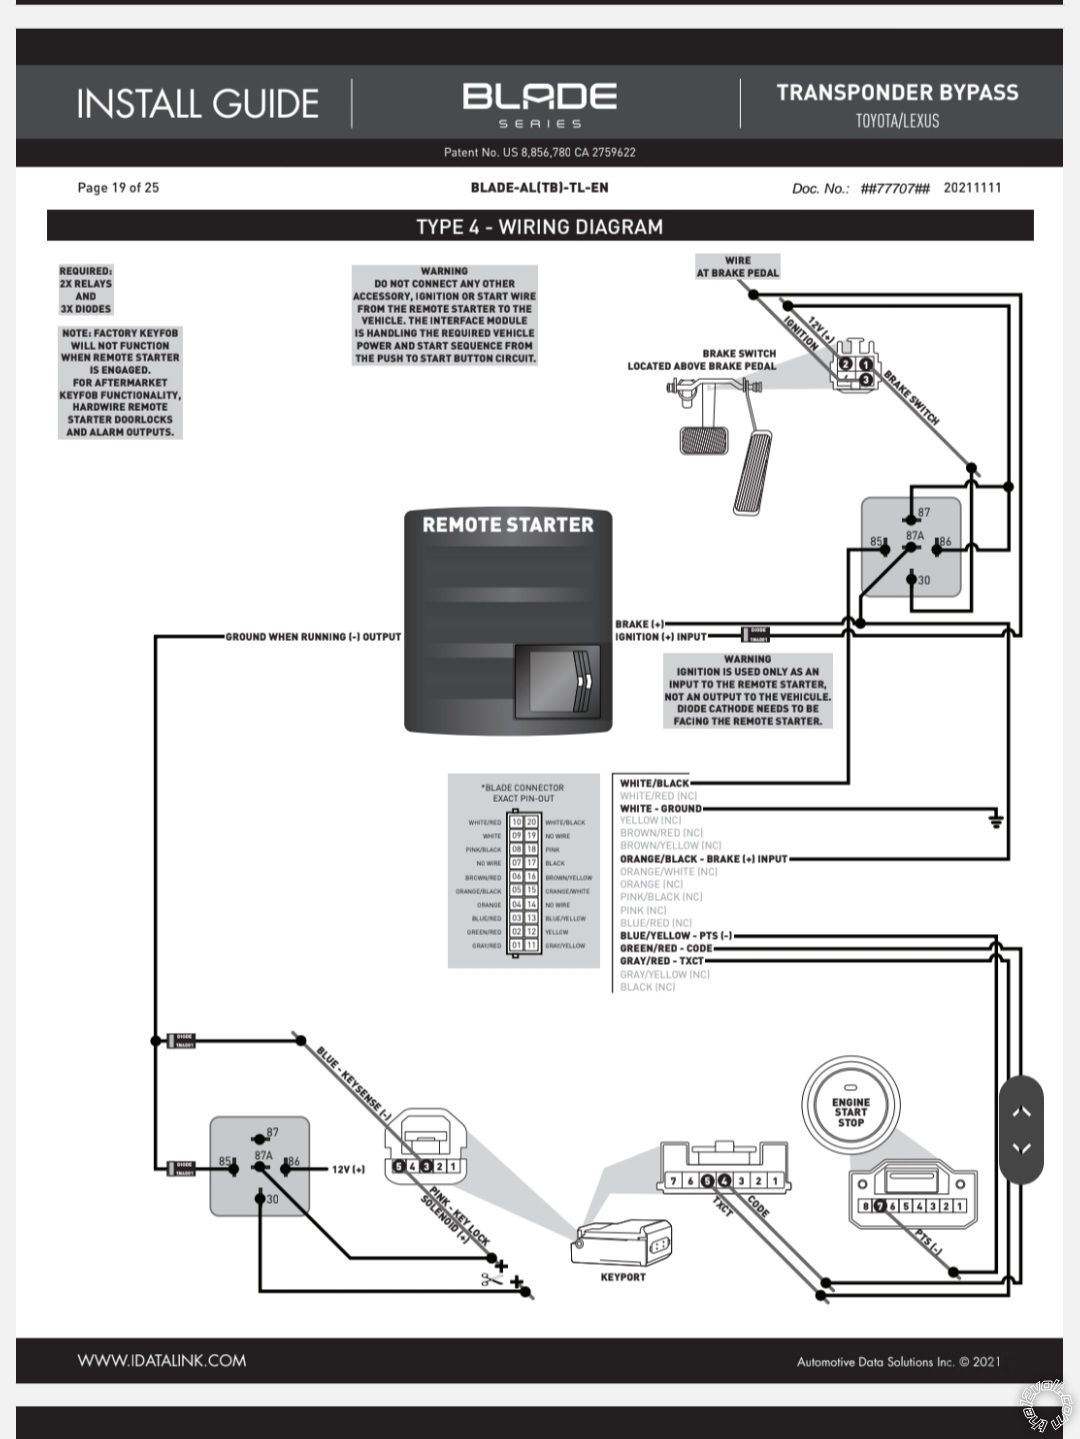 Remote Start Wiring, 2008 Toyota Prius - Page 4 -- posted image.